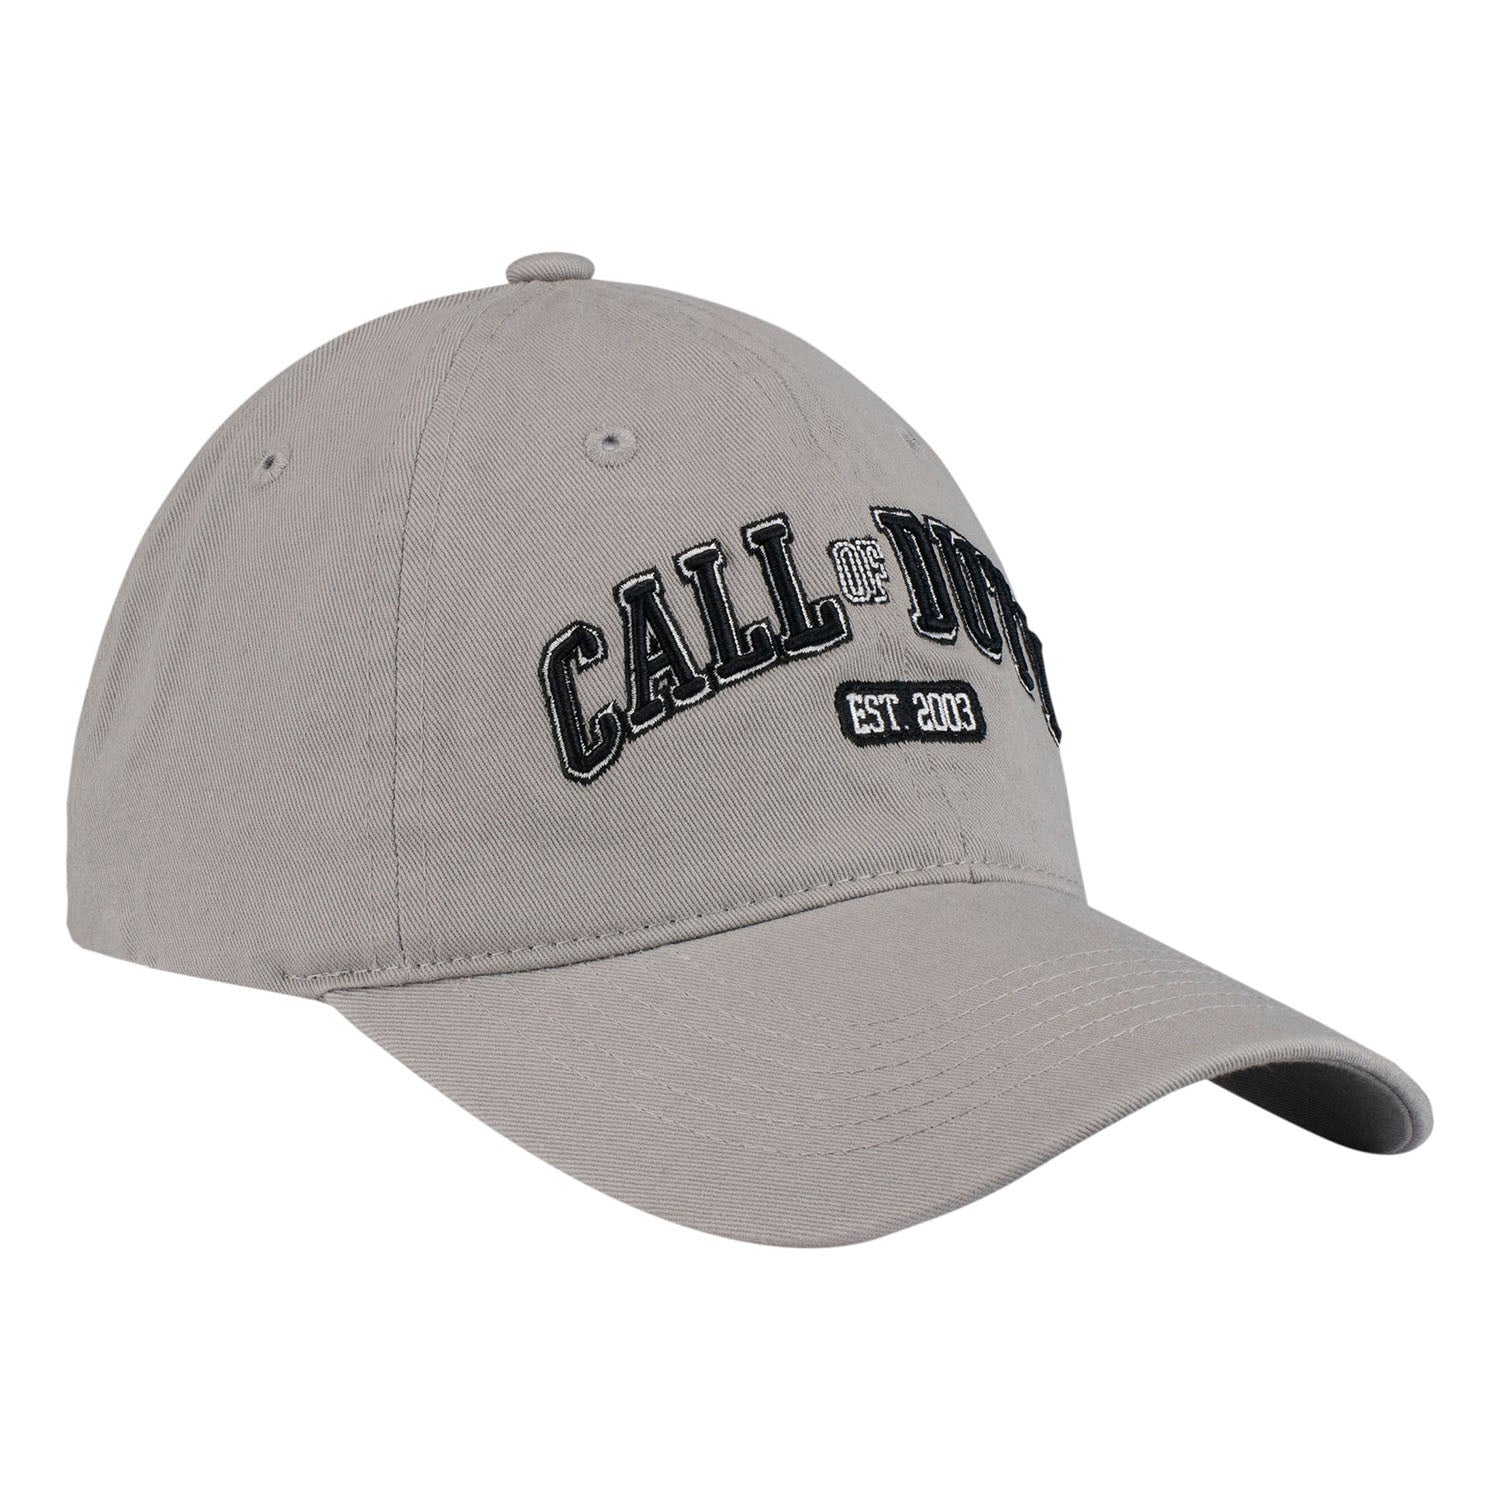 Call of Duty Alumnus Grey Hat- Right View